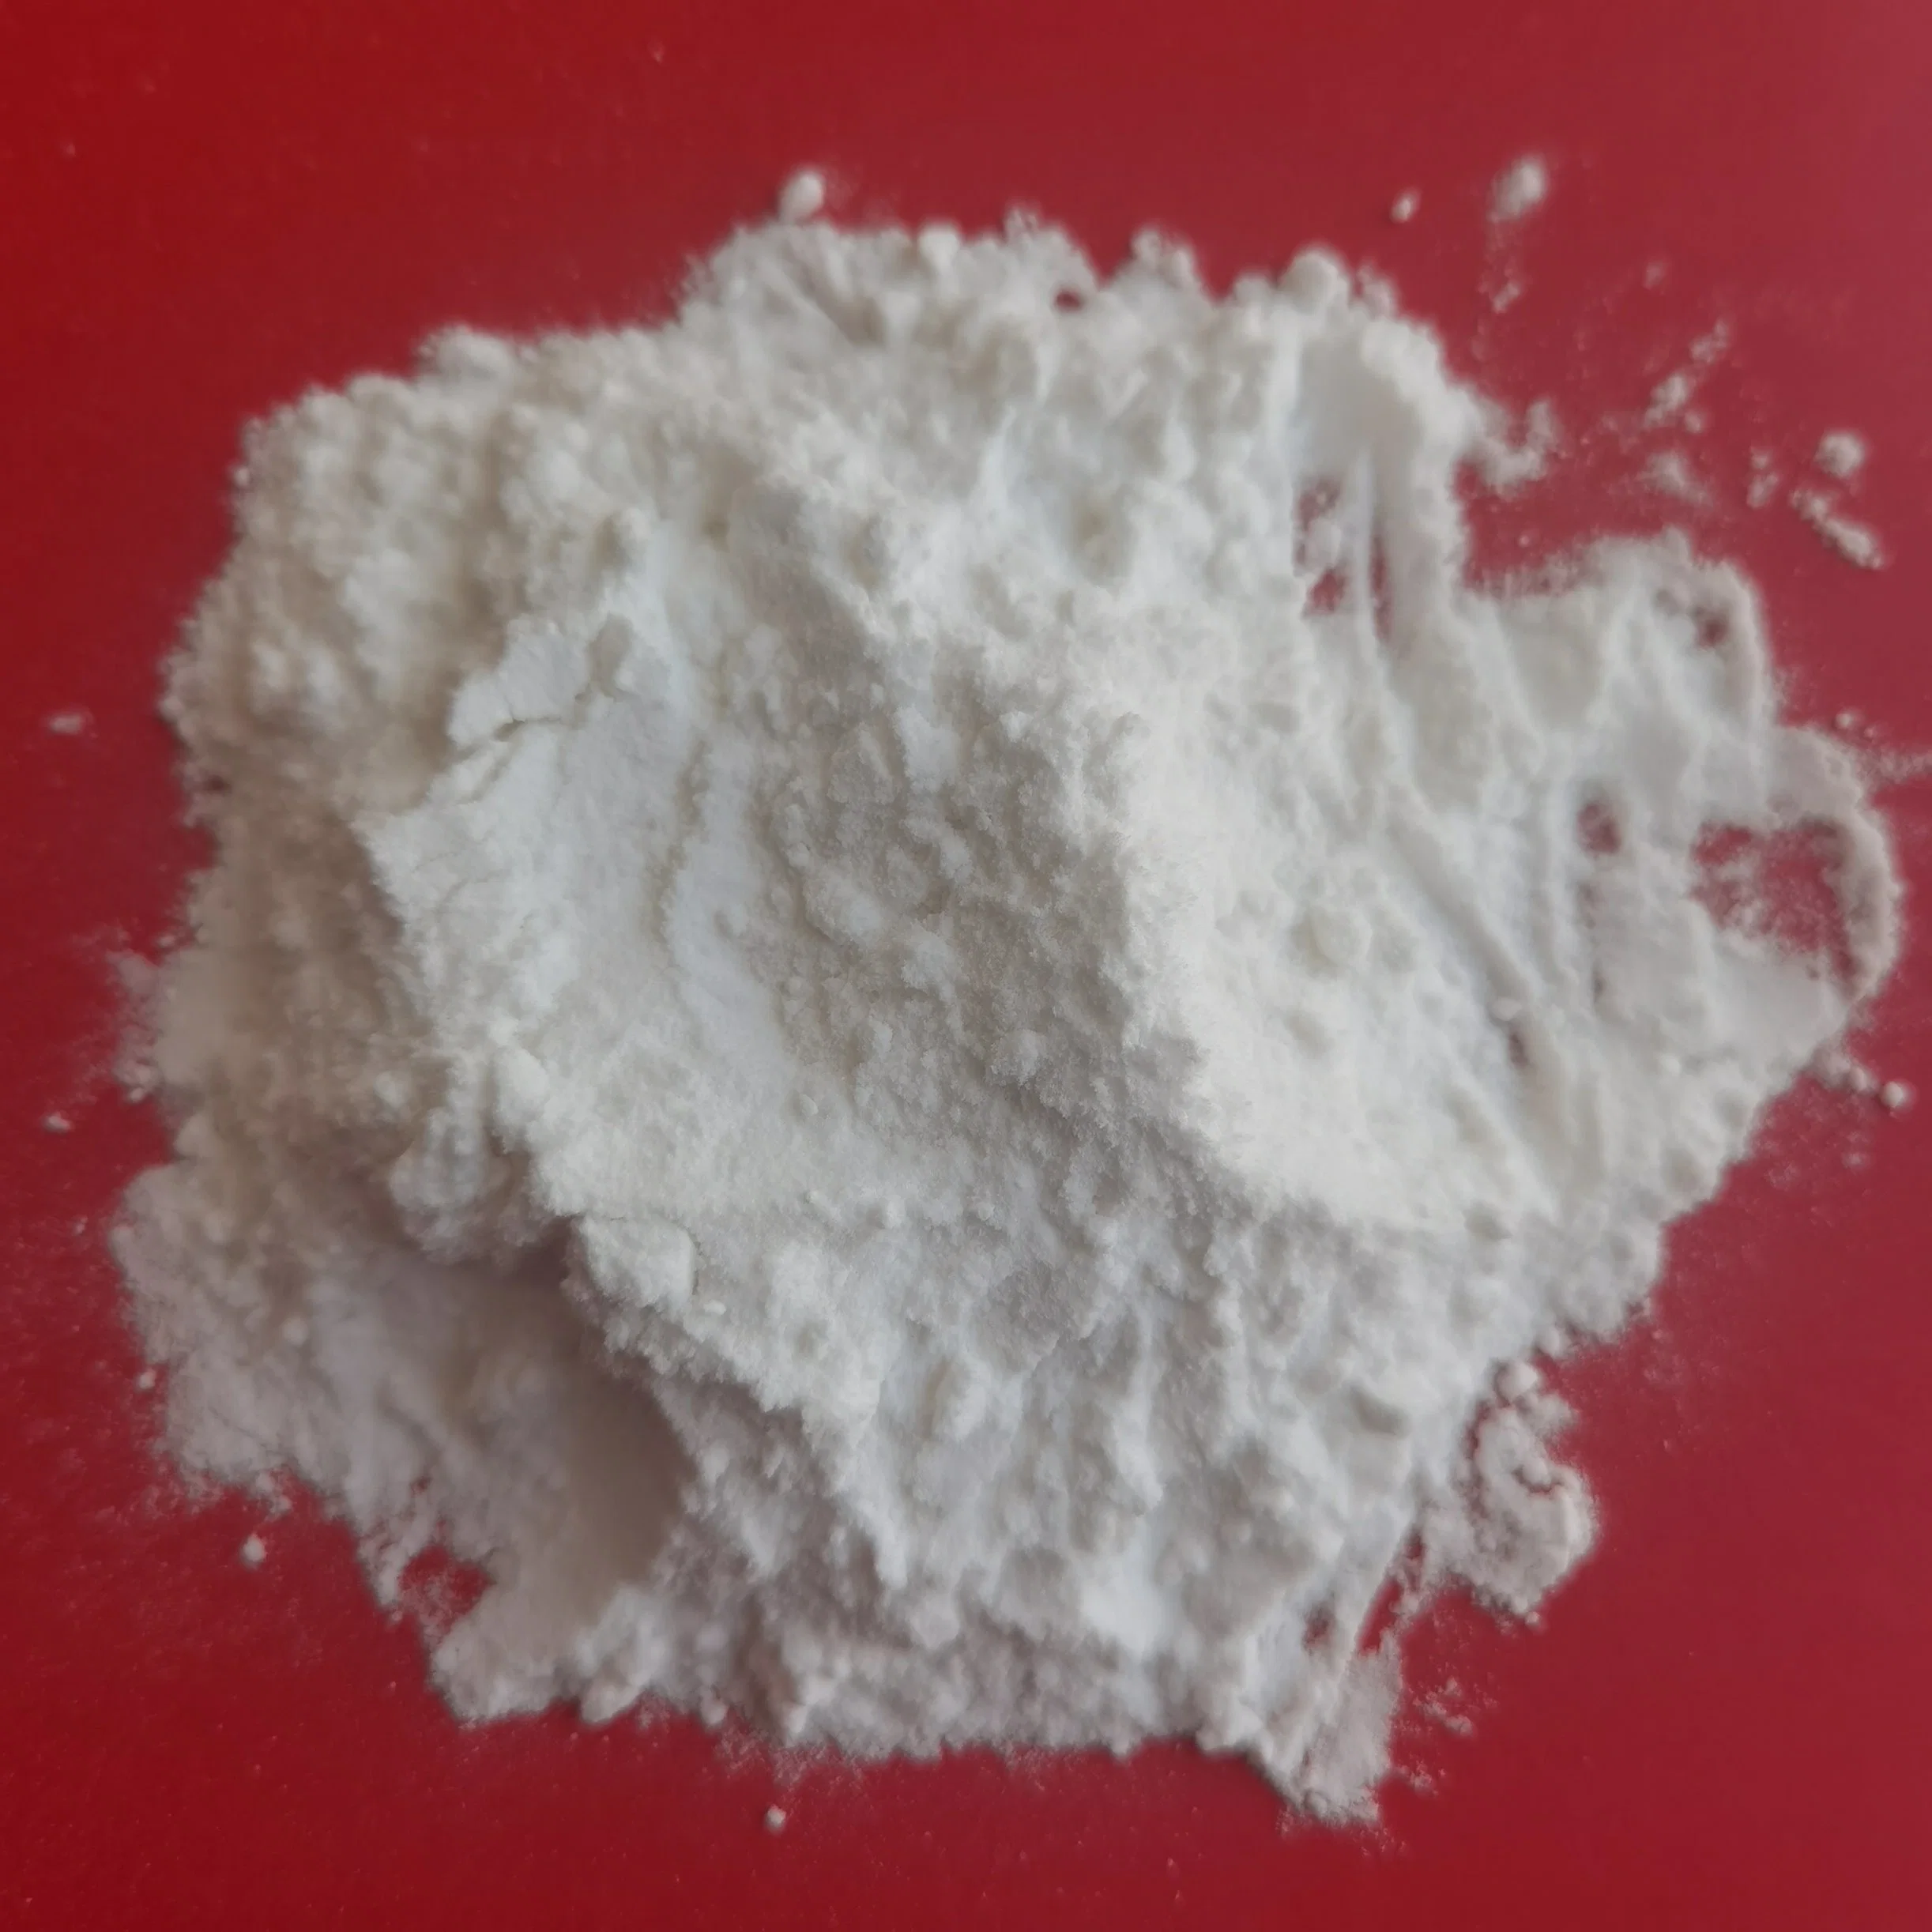 High Purity Irsogladine Maleate CAS 84504-69-8 with Fast and Safe Shipment